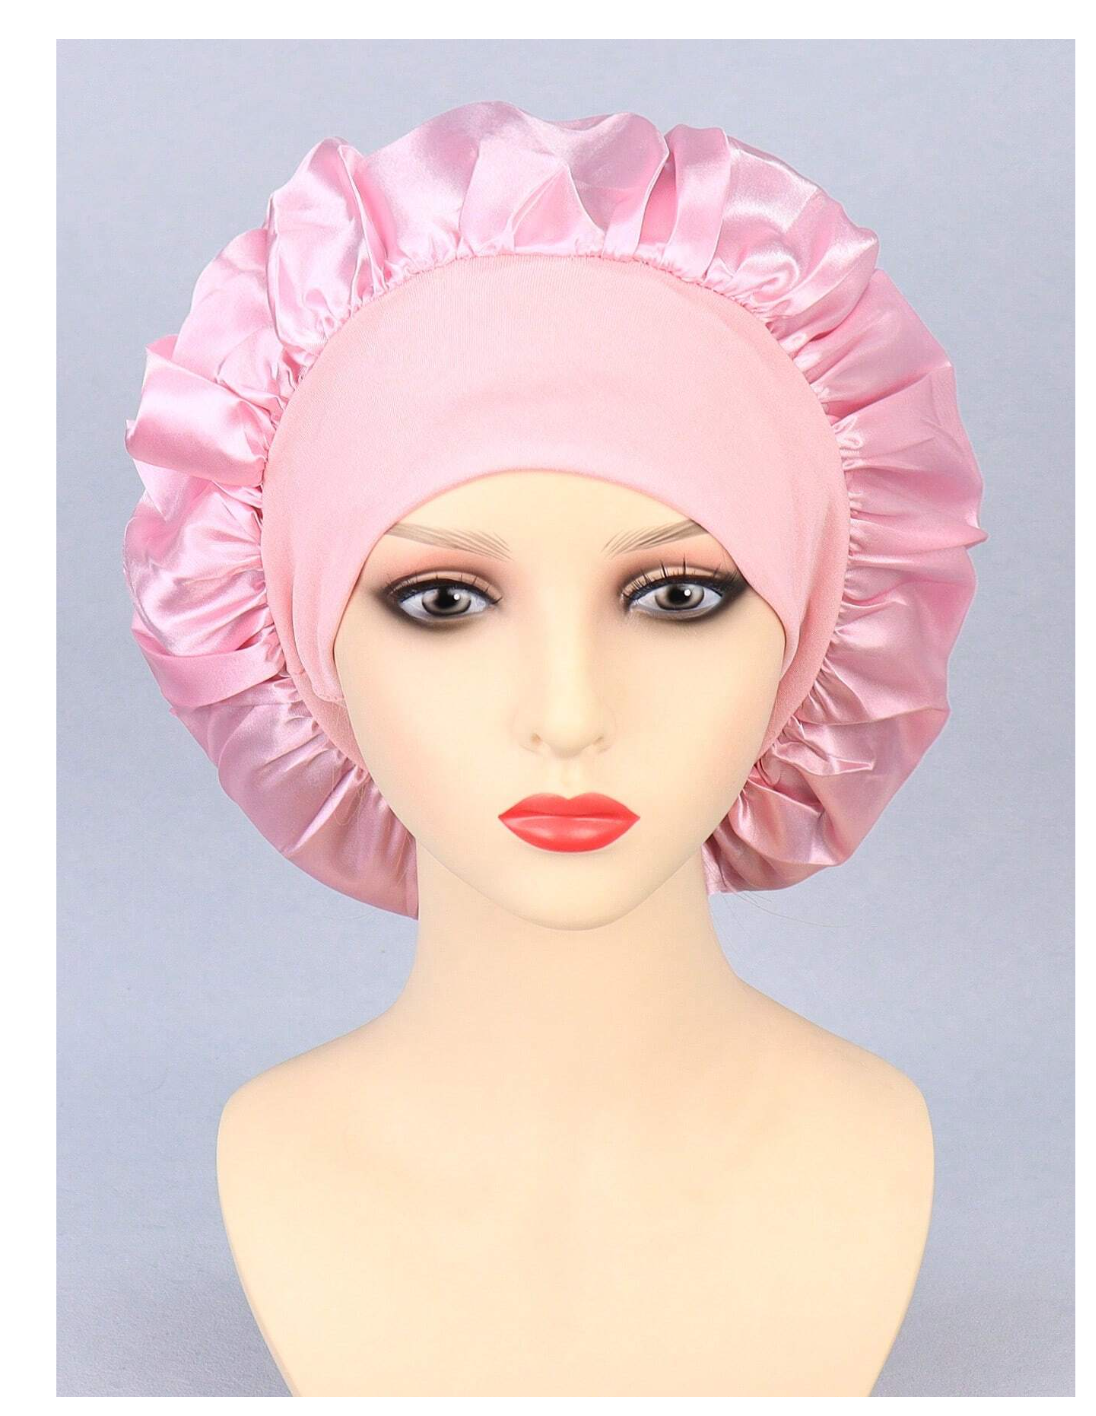 Satin Dreams: 1pc Silk Bonnet – Your Ultimate Sleeping Beauty Headwrap for Hair Protection and Style!